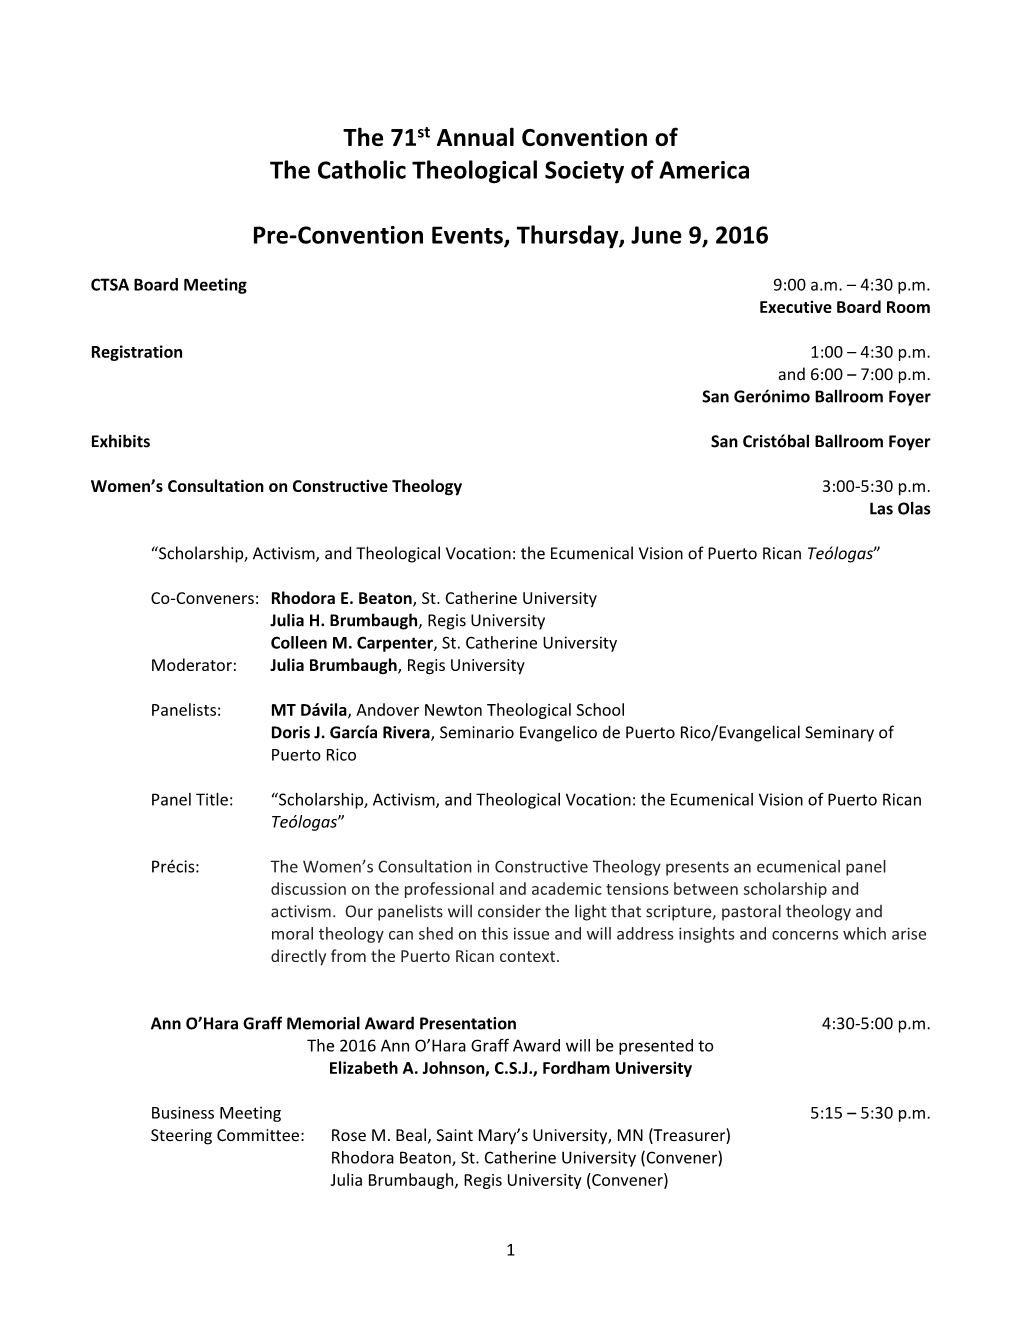 The 71St Annual Convention of the Catholic Theological Society of America